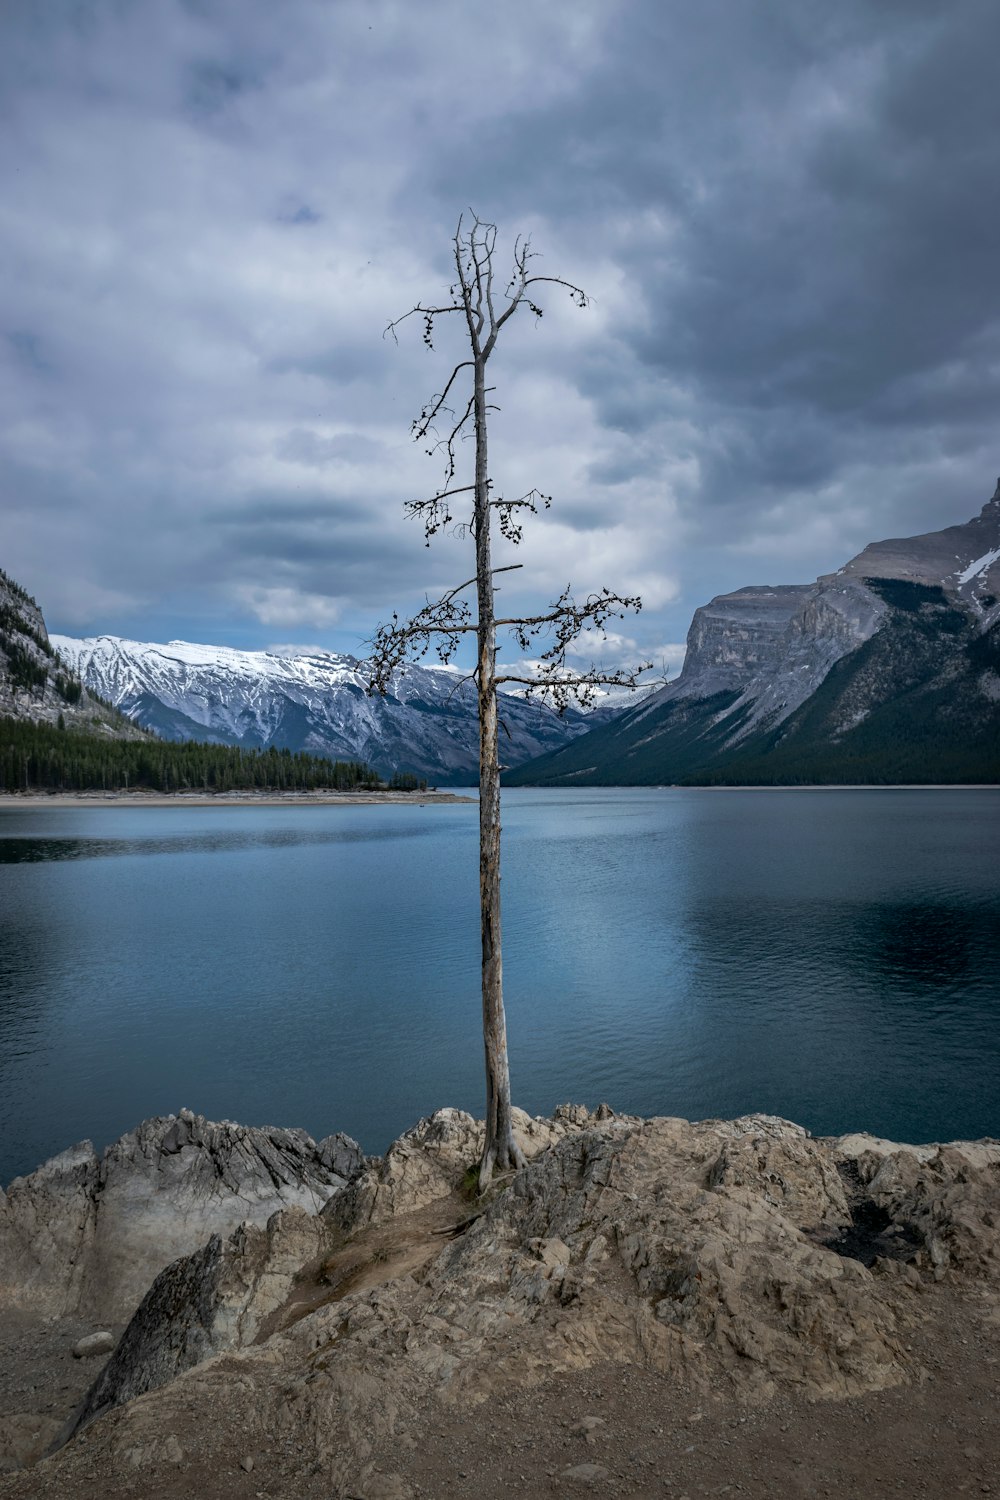 a lone tree stands on a rocky outcropping near a body of water